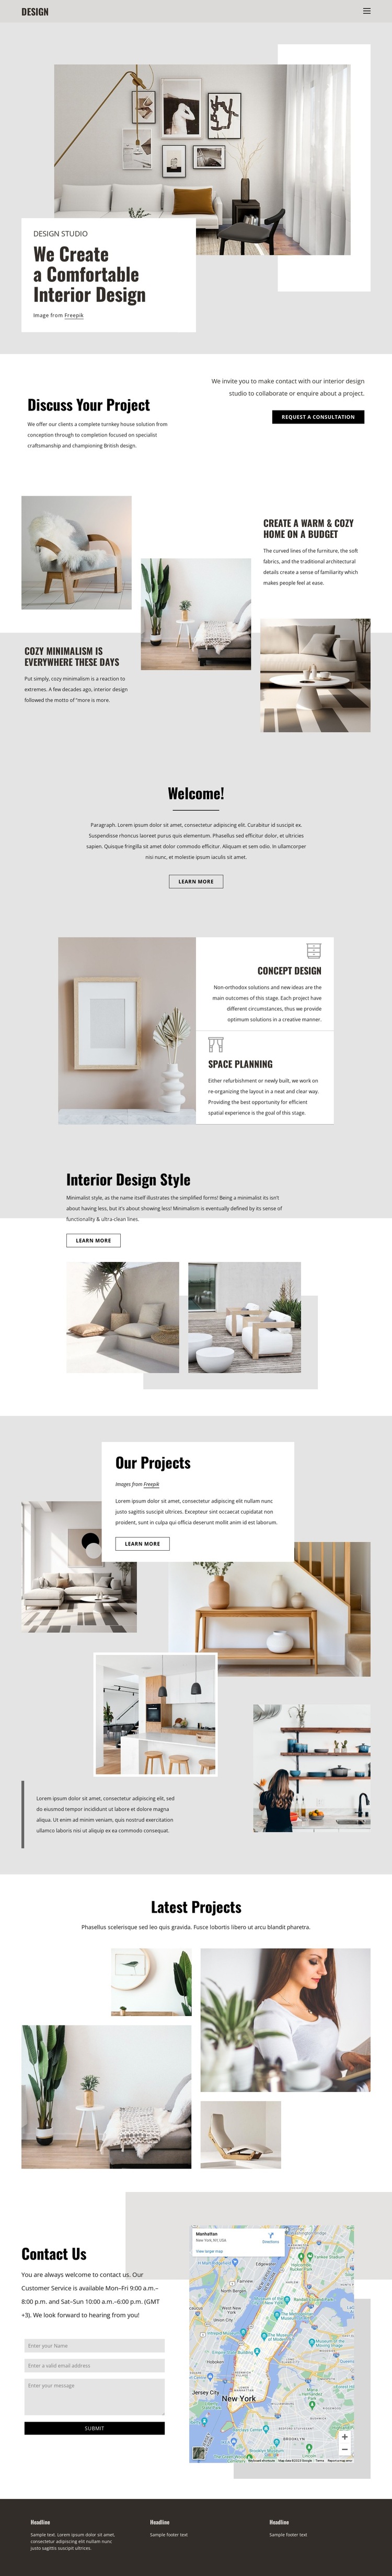 Designing Spaces and building dreams HTML5 Template